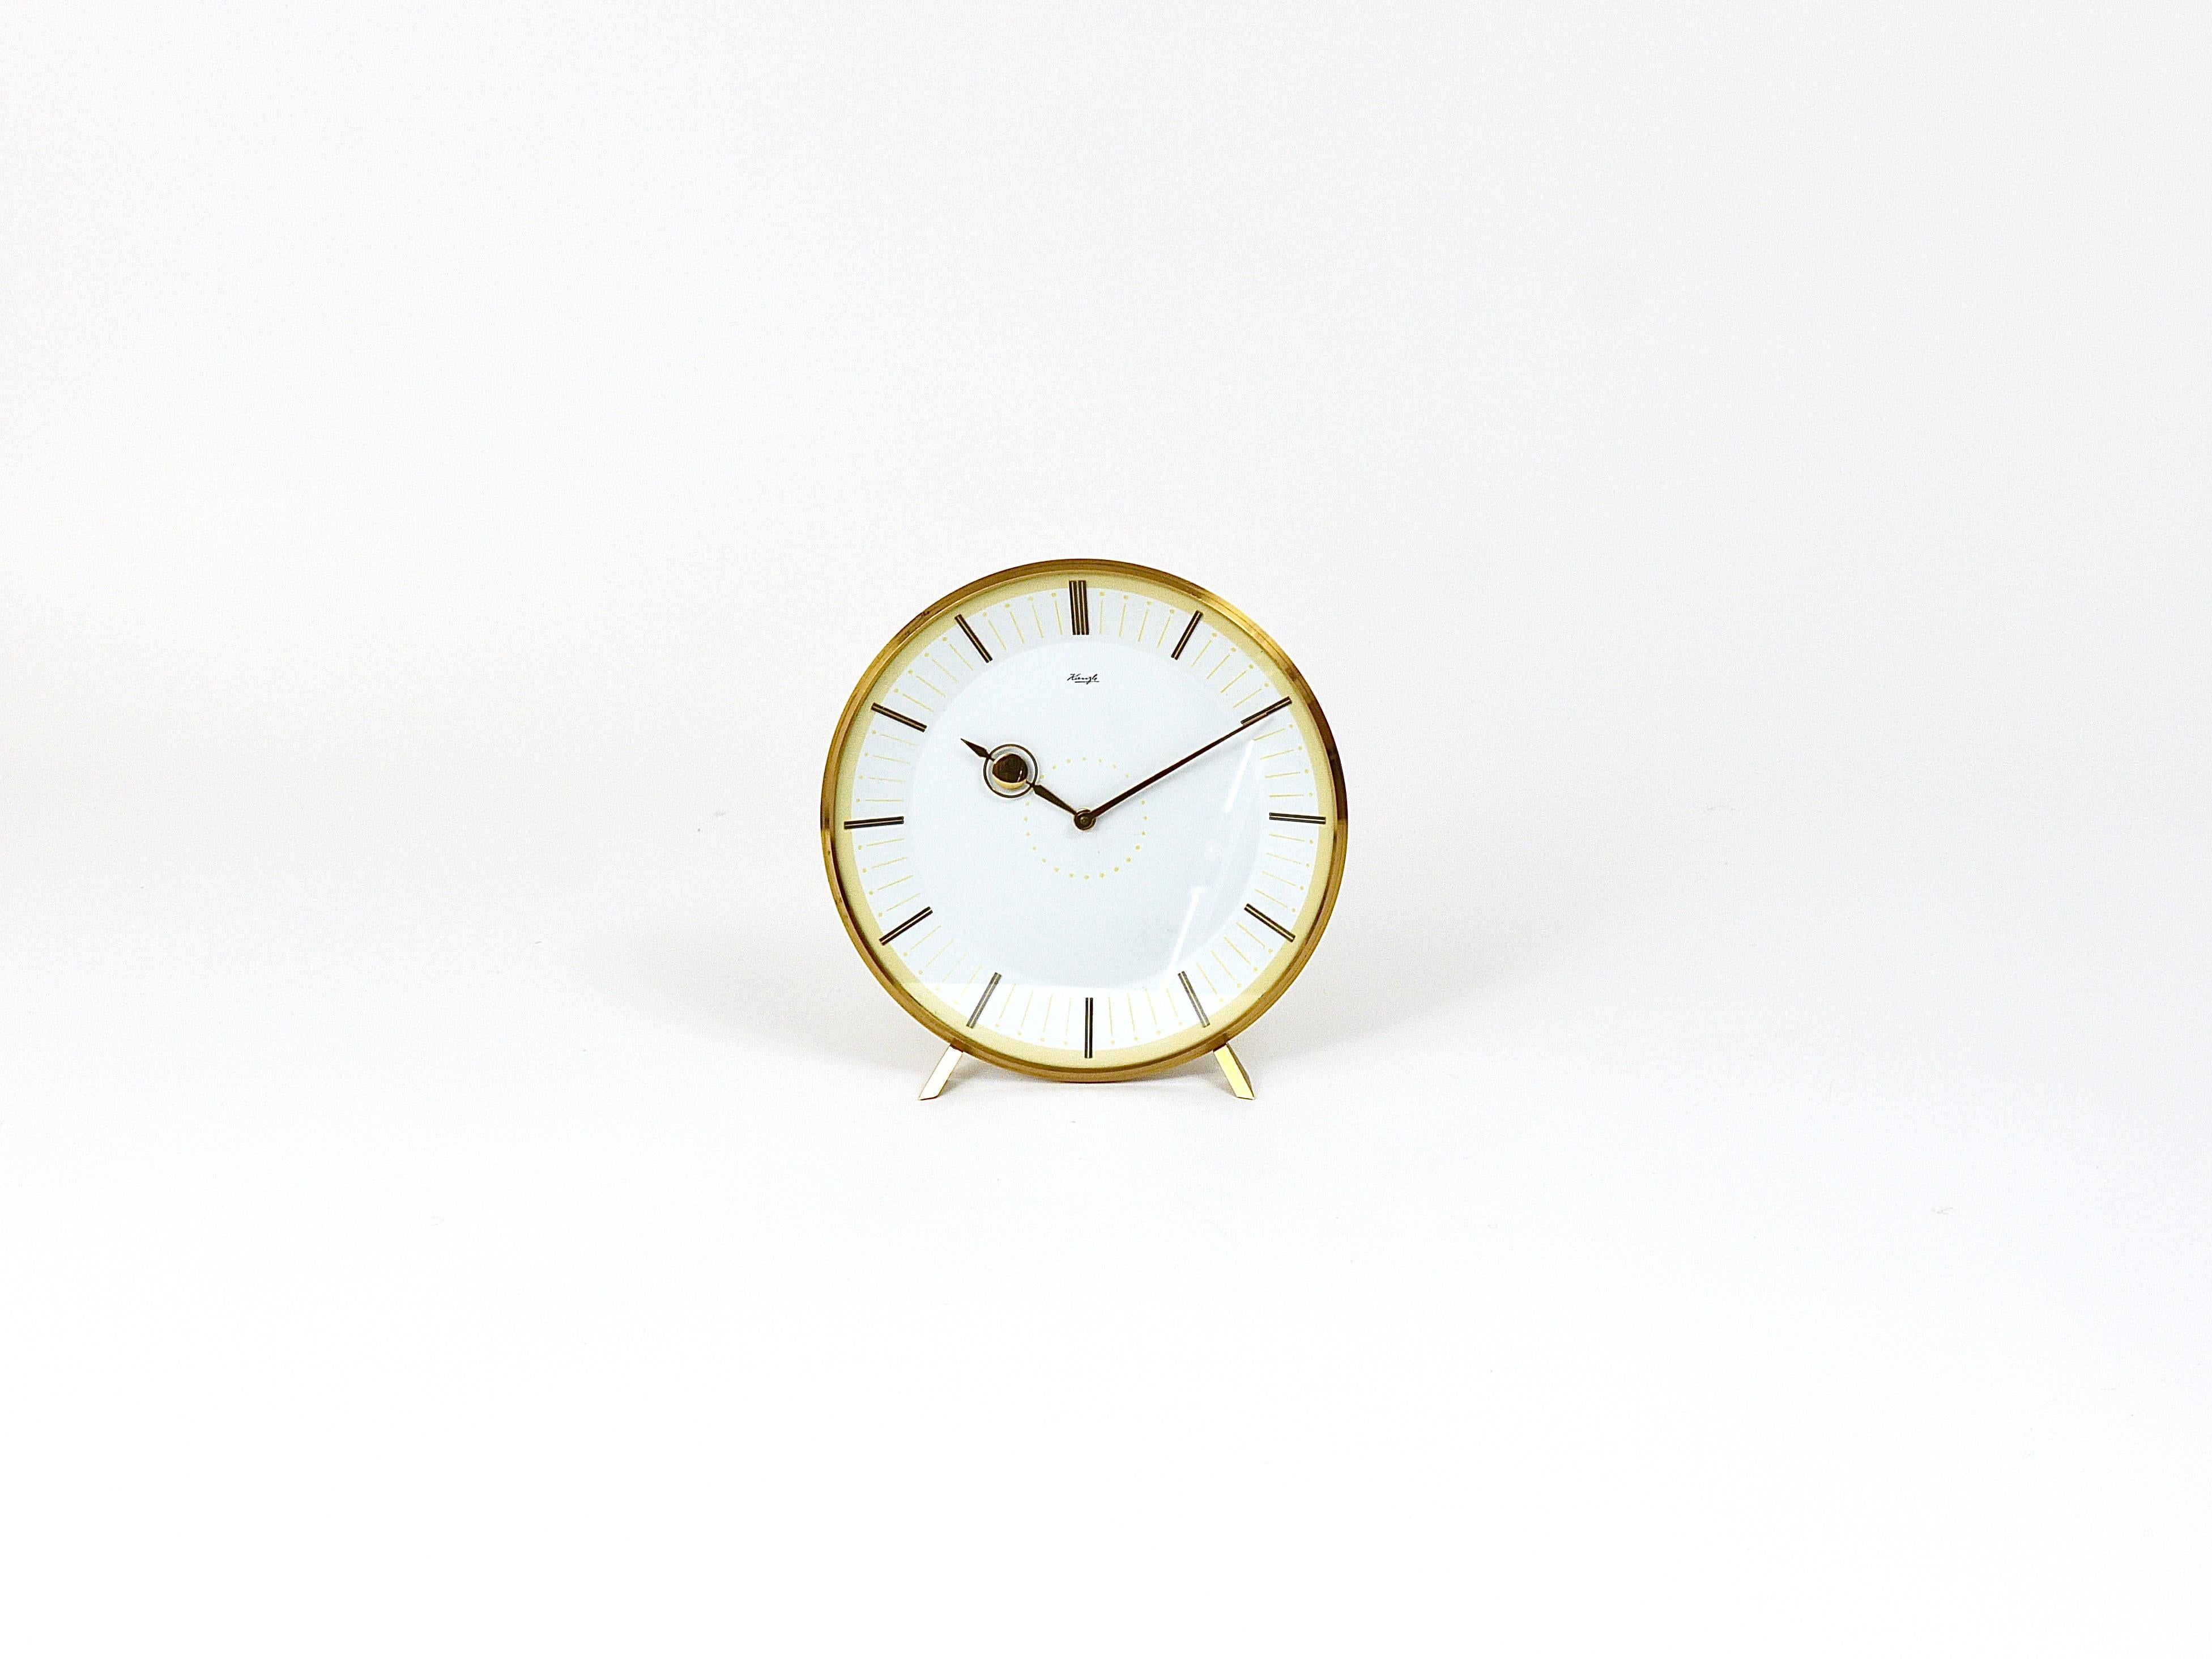 An elegant Mid-Century Modern desk or table clock with a mechanical 8-days movement from the 1950s. Executed by Kienzle Germany. This charming clock has a partly polished brass housing, a lovely clocks face with pastel yellow and golden indices and